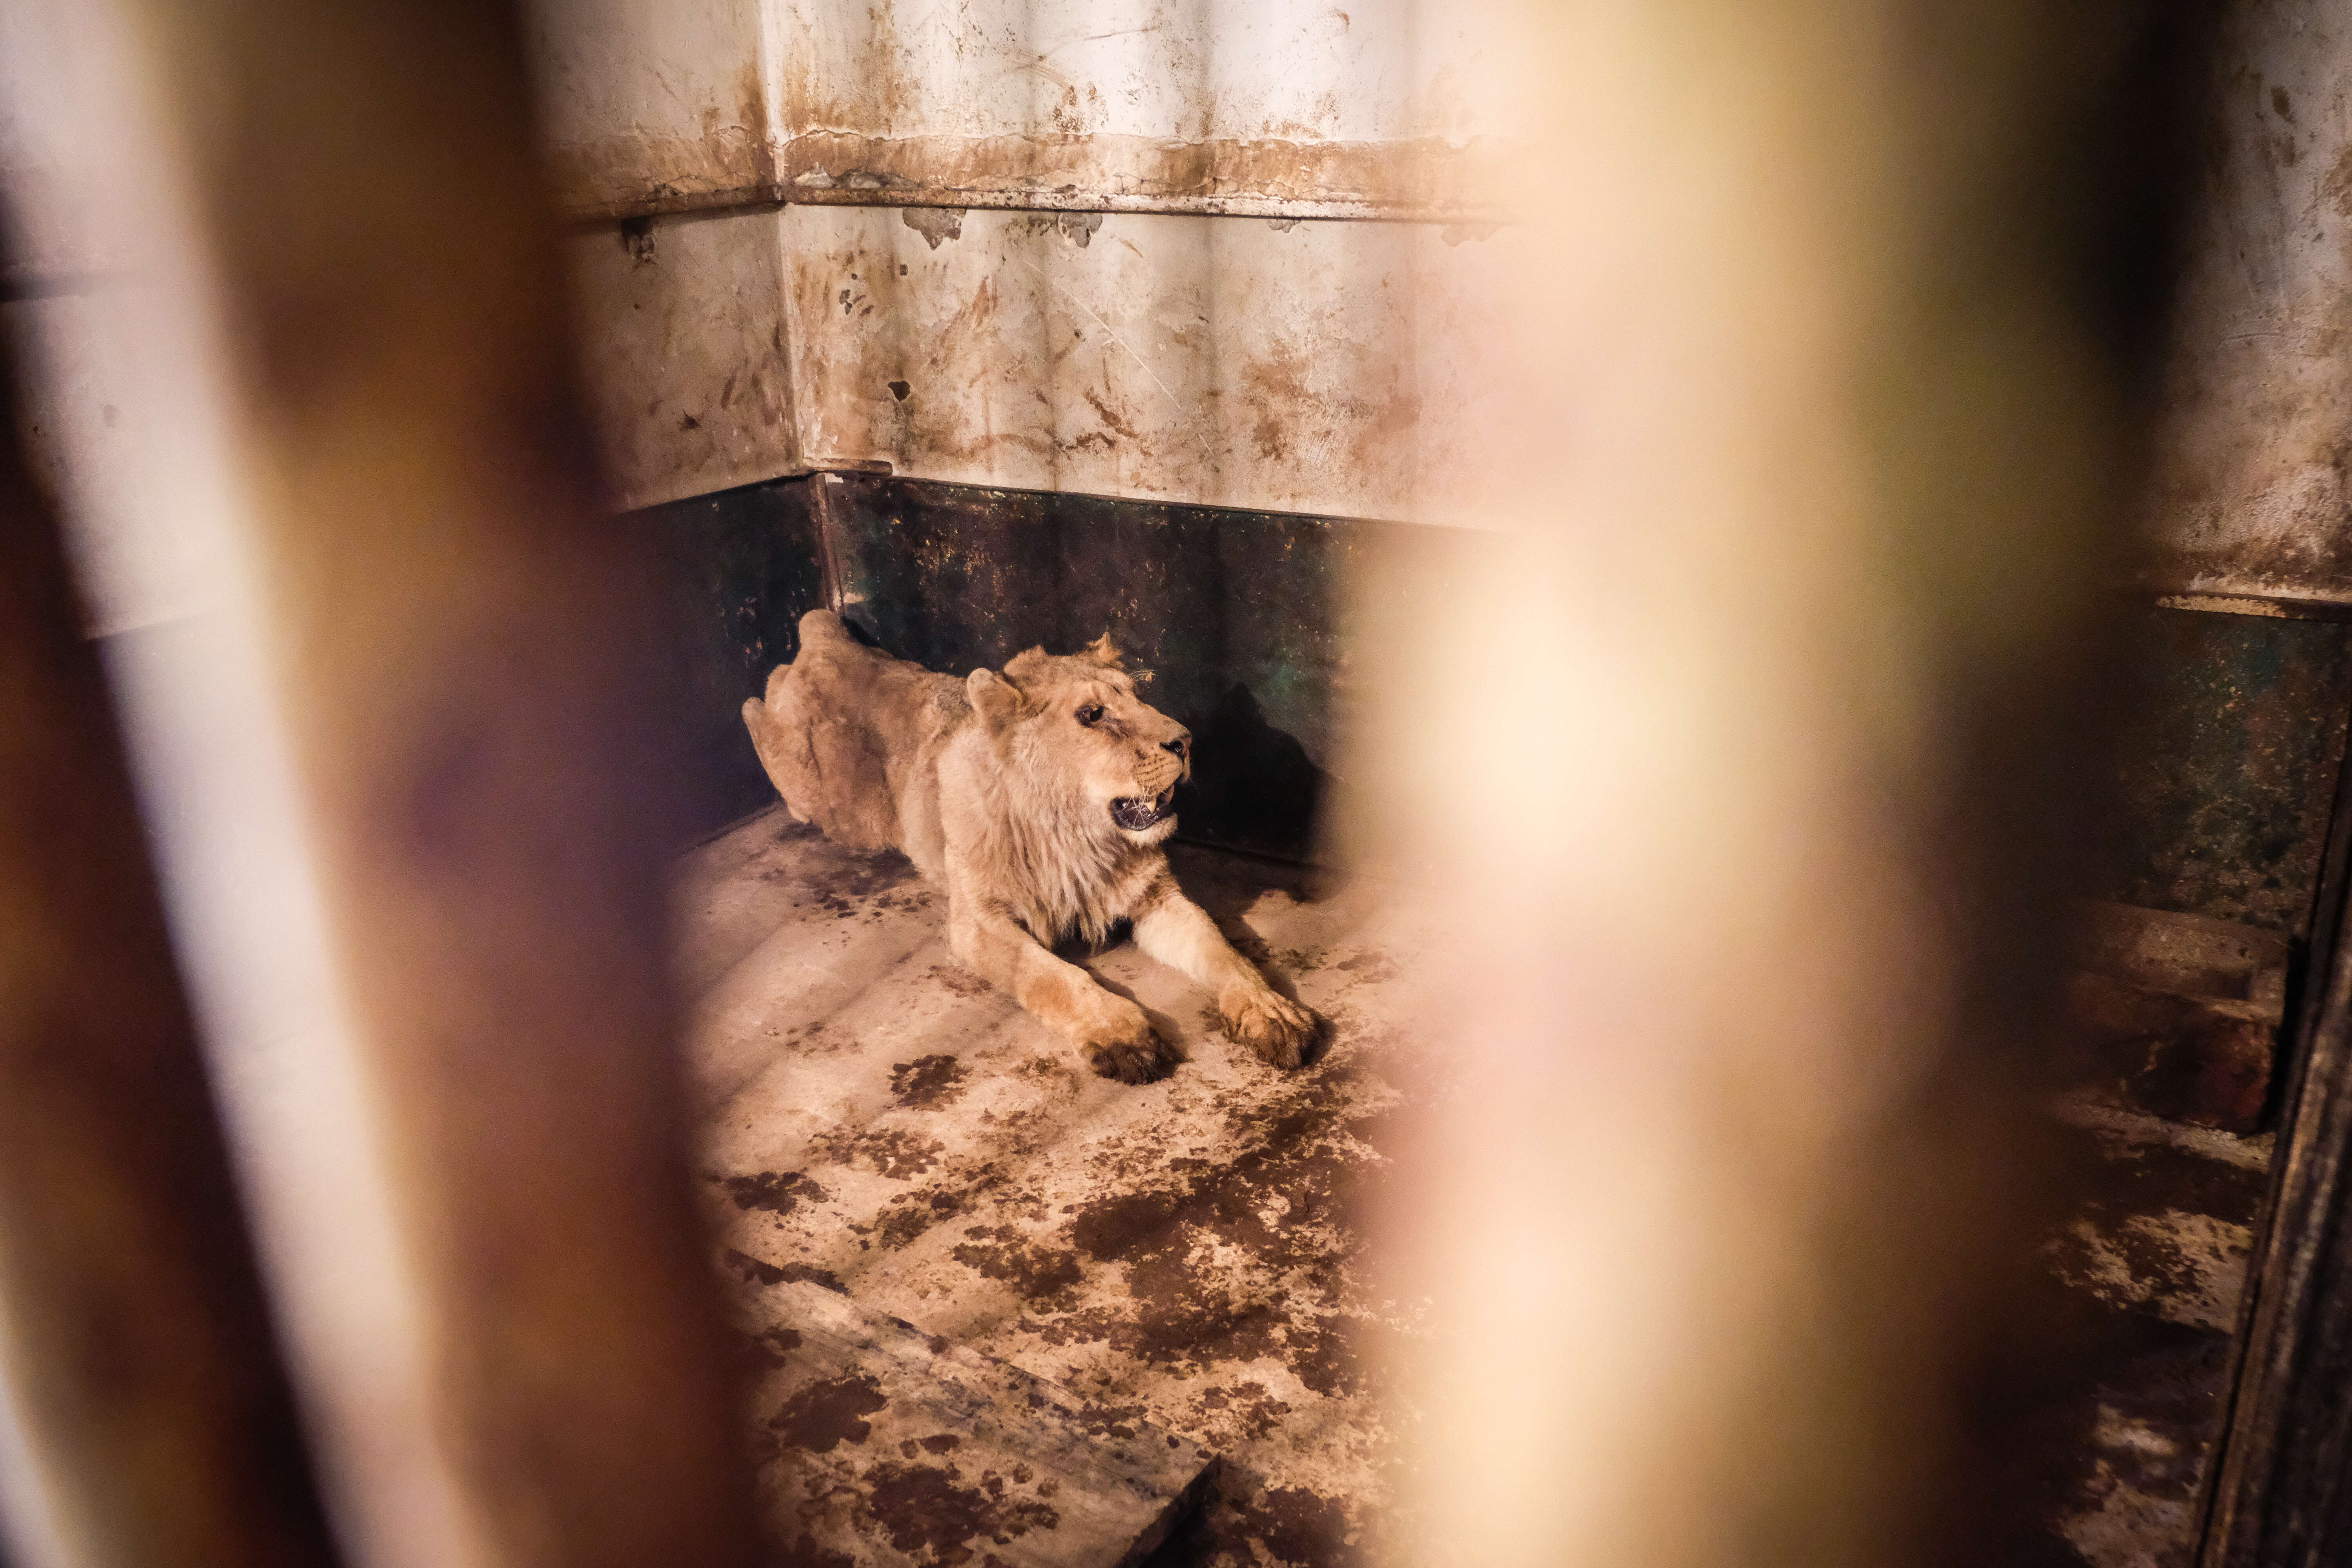 Lions suffering at illegal zoo in Bulgaria getting help